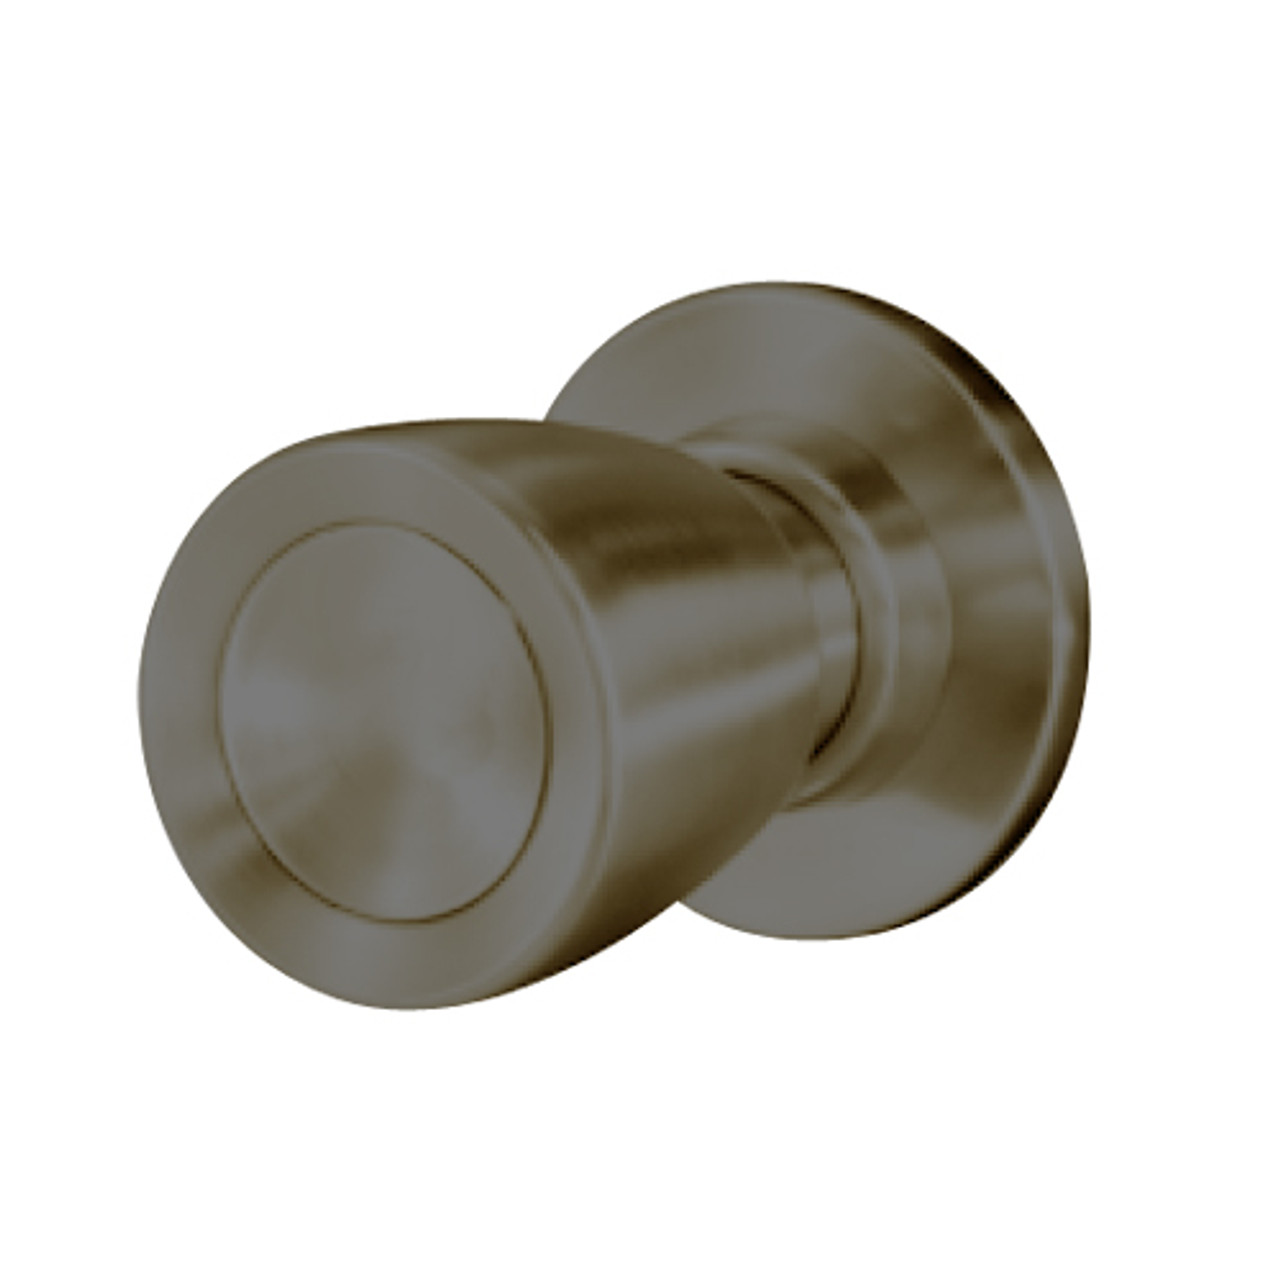 8K30Z6CSTK613 Best 8K Series Closet Heavy Duty Cylindrical Knob Locks with Tulip Style in Oil Rubbed Bronze